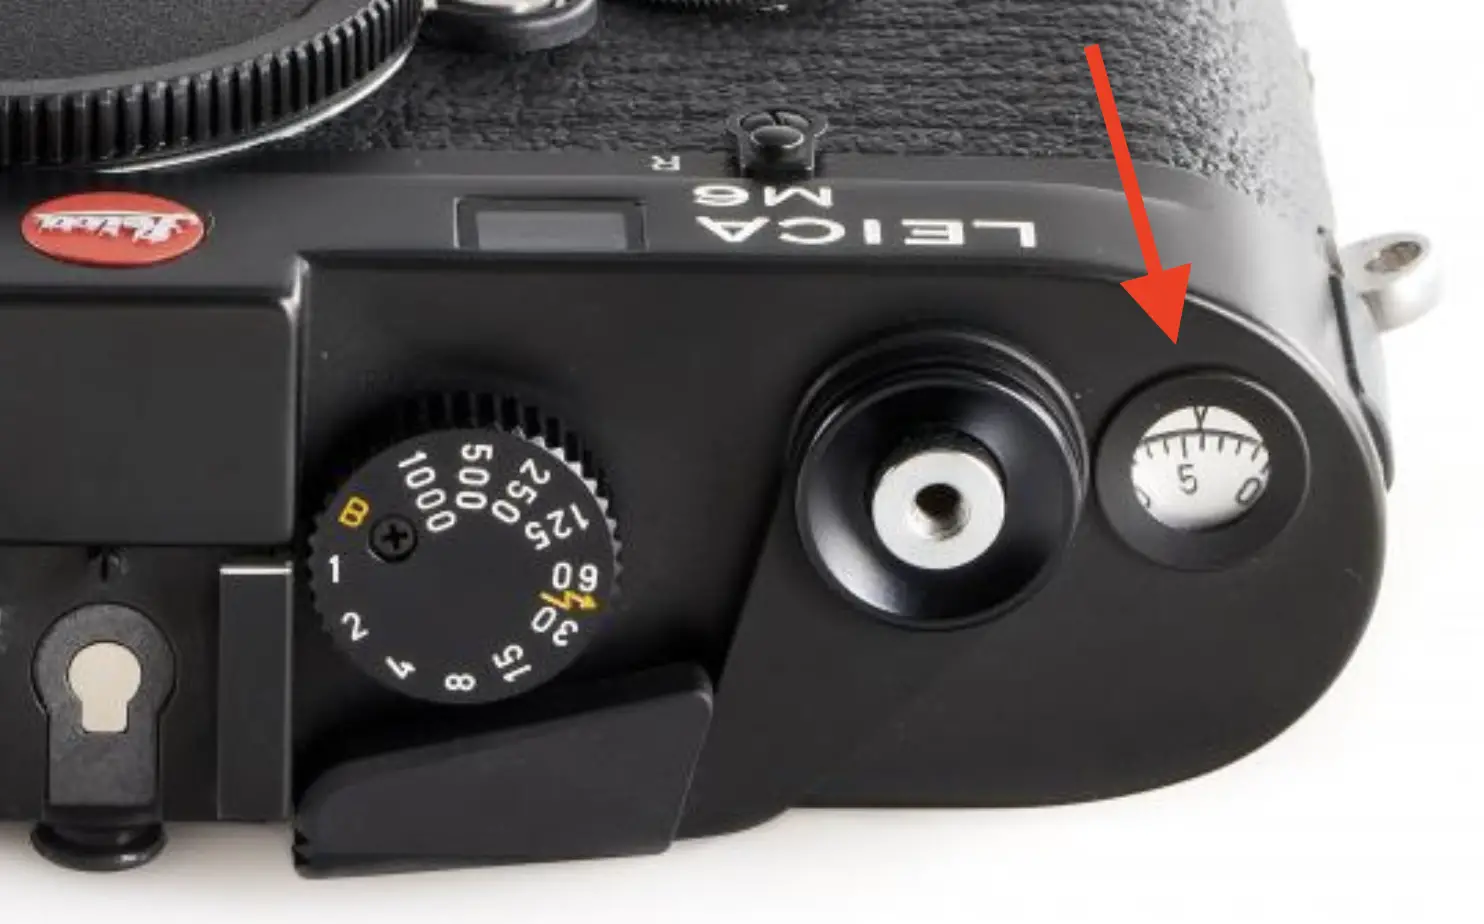 How Do You Know When A Film camera Is Out of Film?